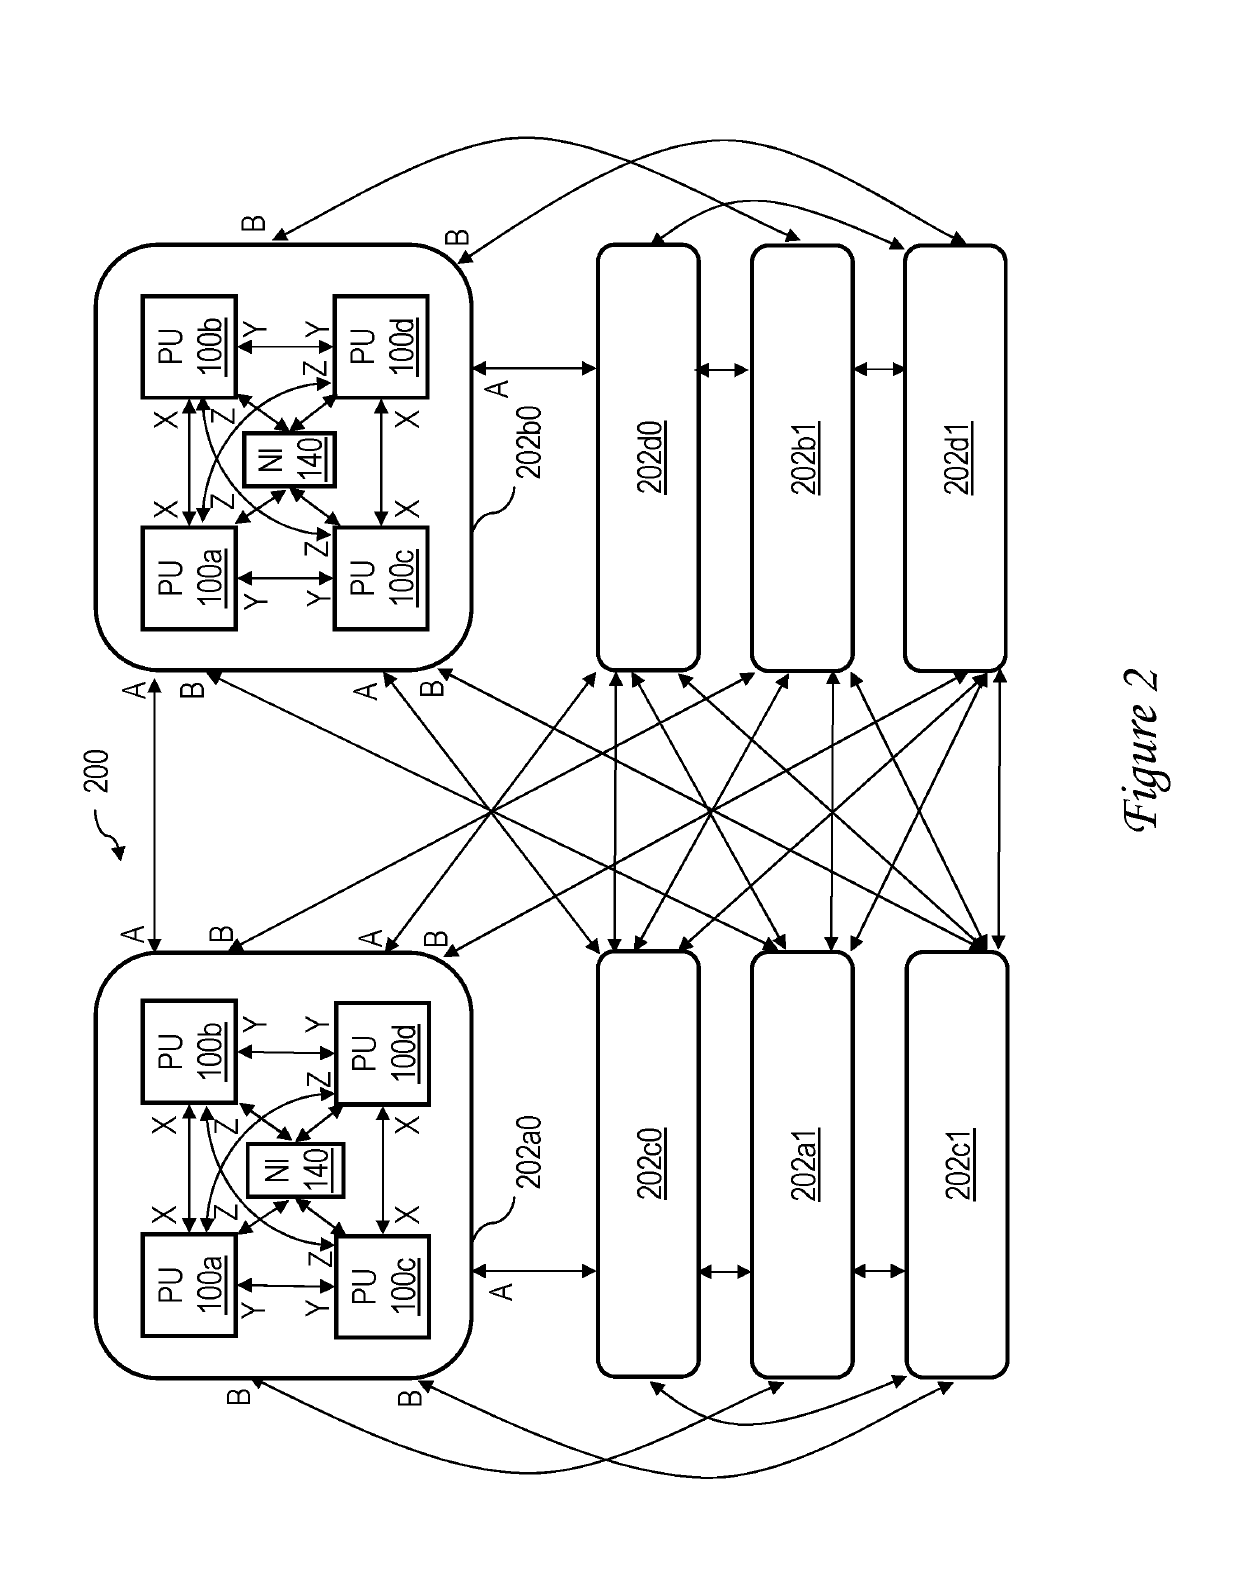 Coherence protocol providing speculative coherence response to directory probe